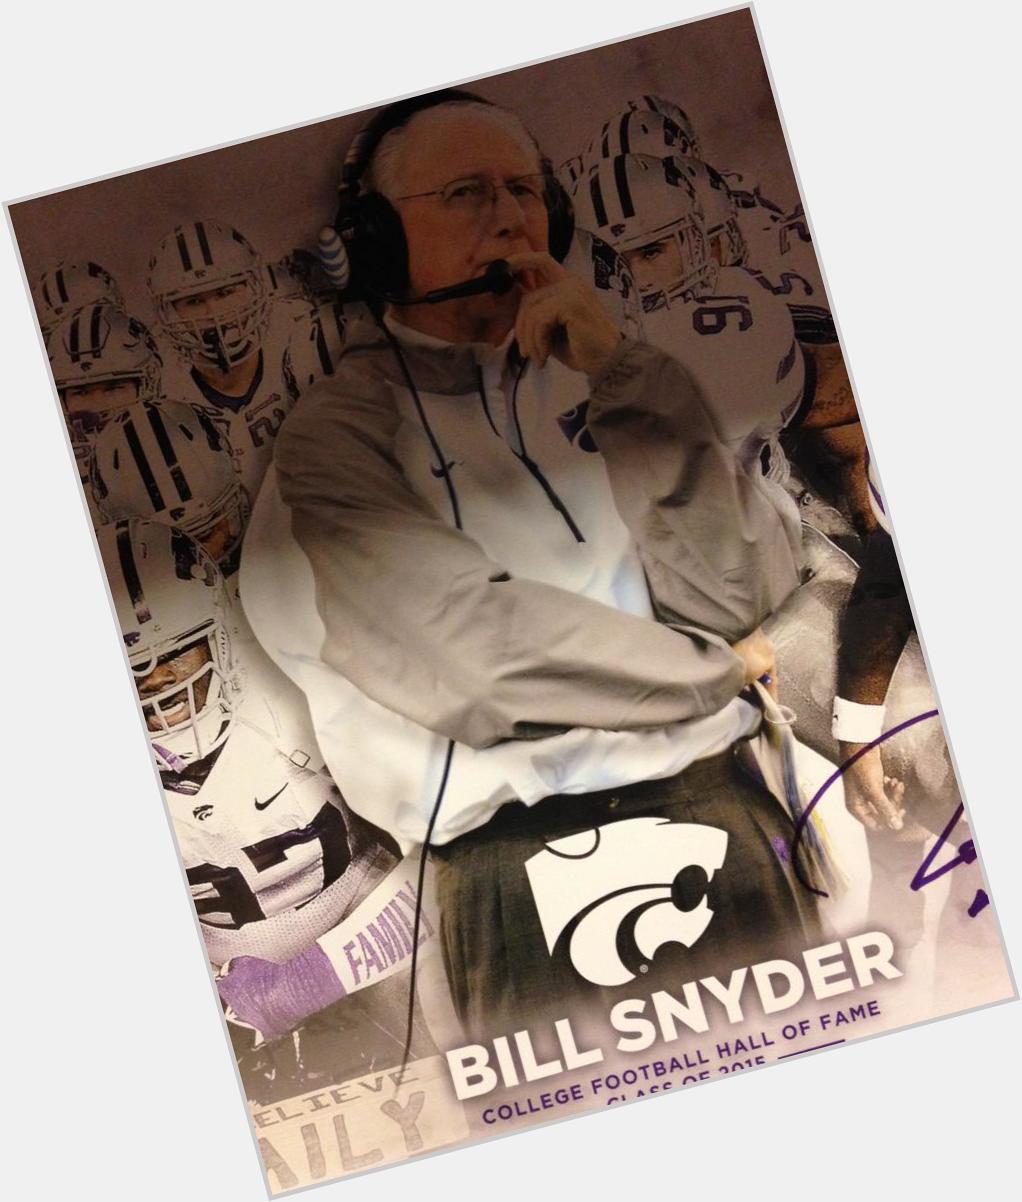 Happy 76th birthday to the architect of the greatest turnaround in college football history, Bill Snyder. 